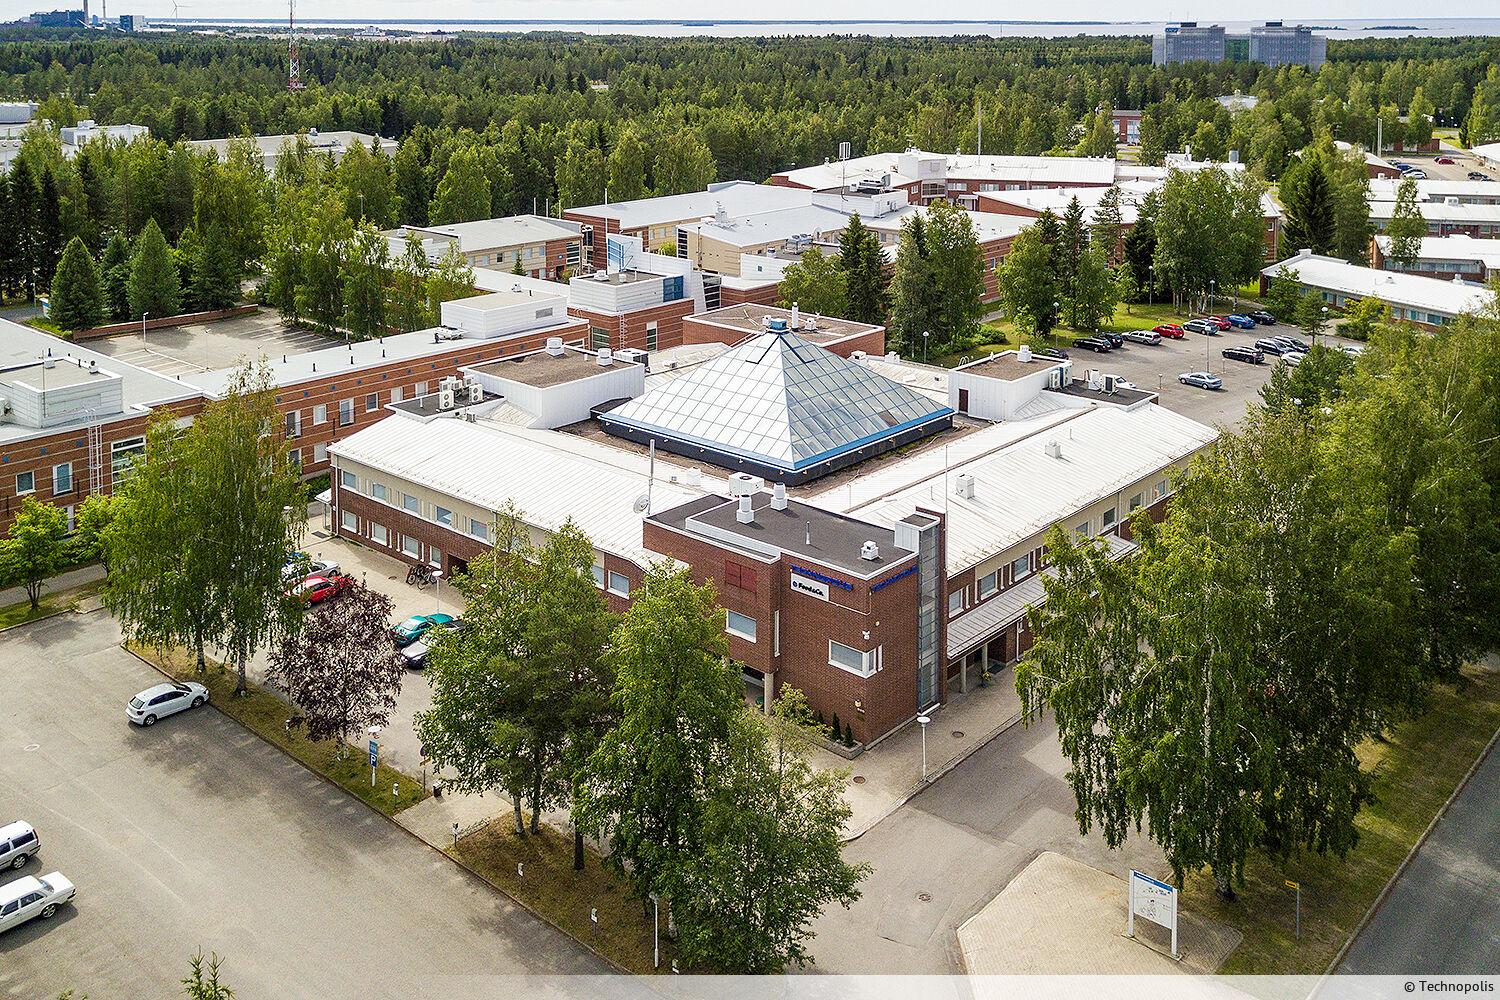 A bright second floor office space for rent from Technopolis Linnanmaa Technology Village. Working at the Linnanmaa campus is enjoyable.